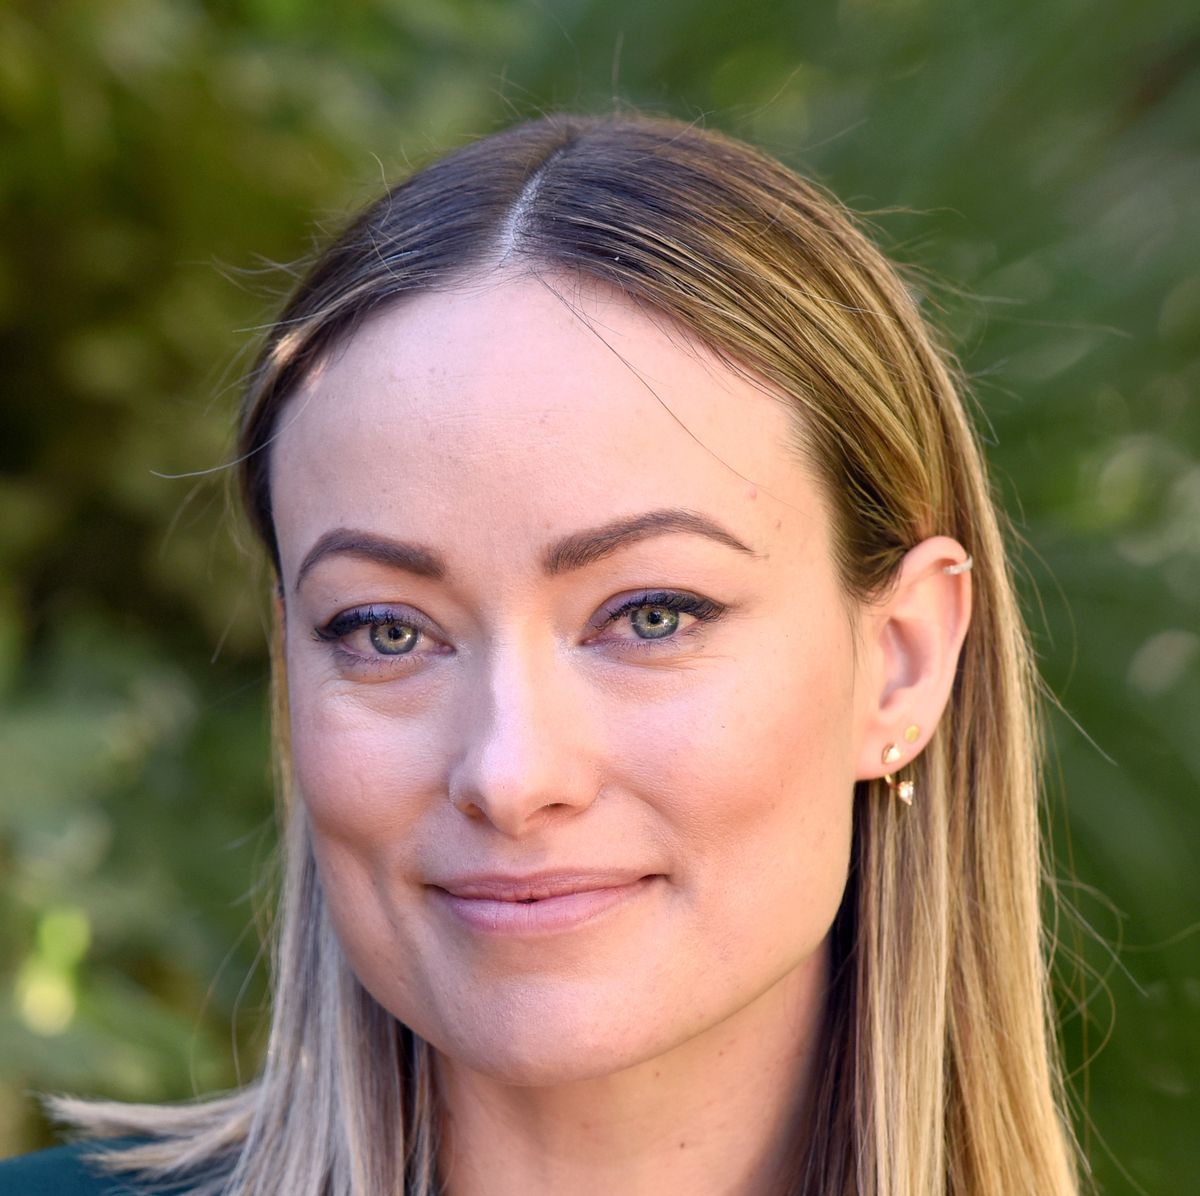 Olivia Wilde Slays With Sculpted Abs In A Sports Bra In New Photos